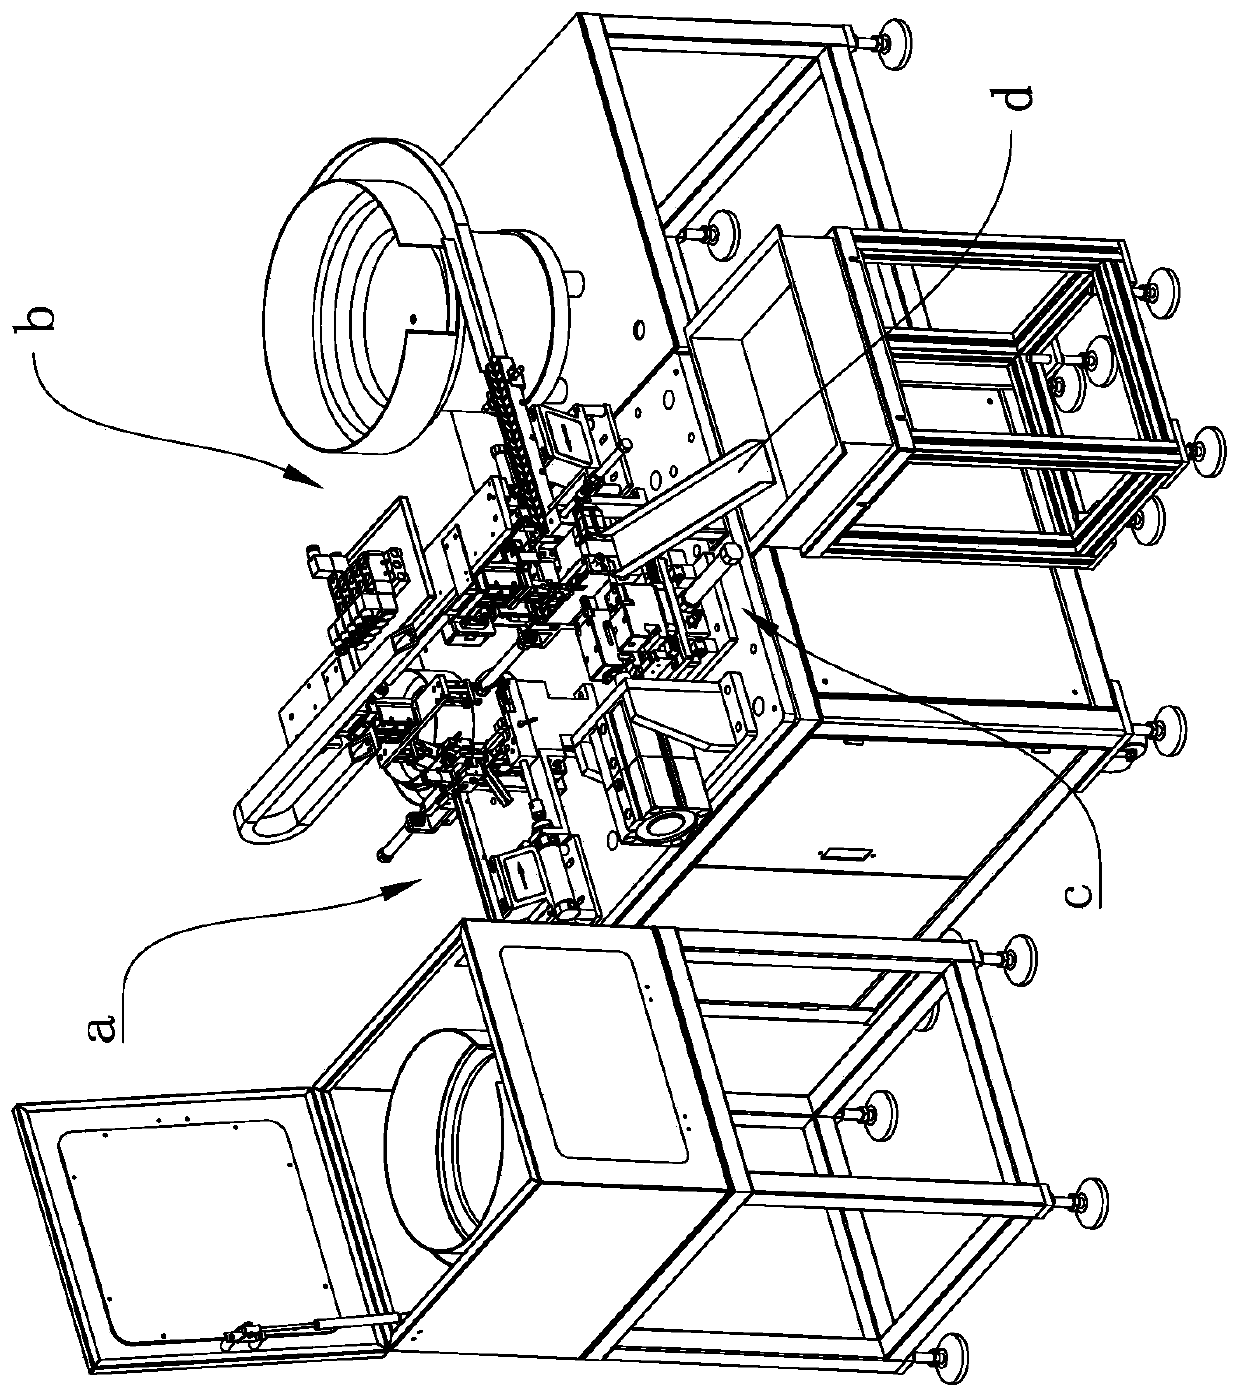 Assembling machine for right-angle male connectors